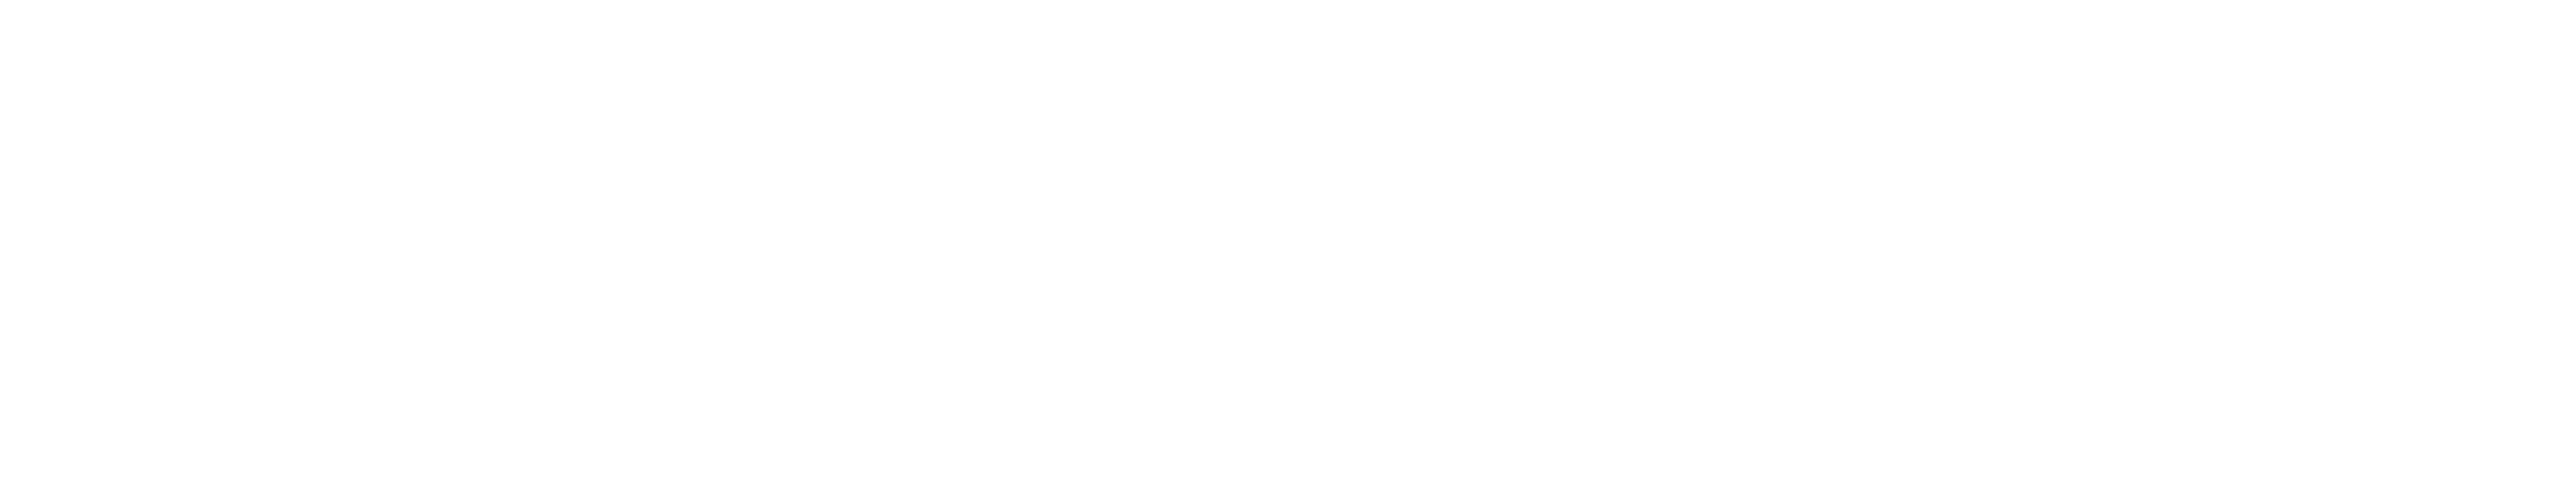 Jack Peterson, Attorney At Law, P.C.